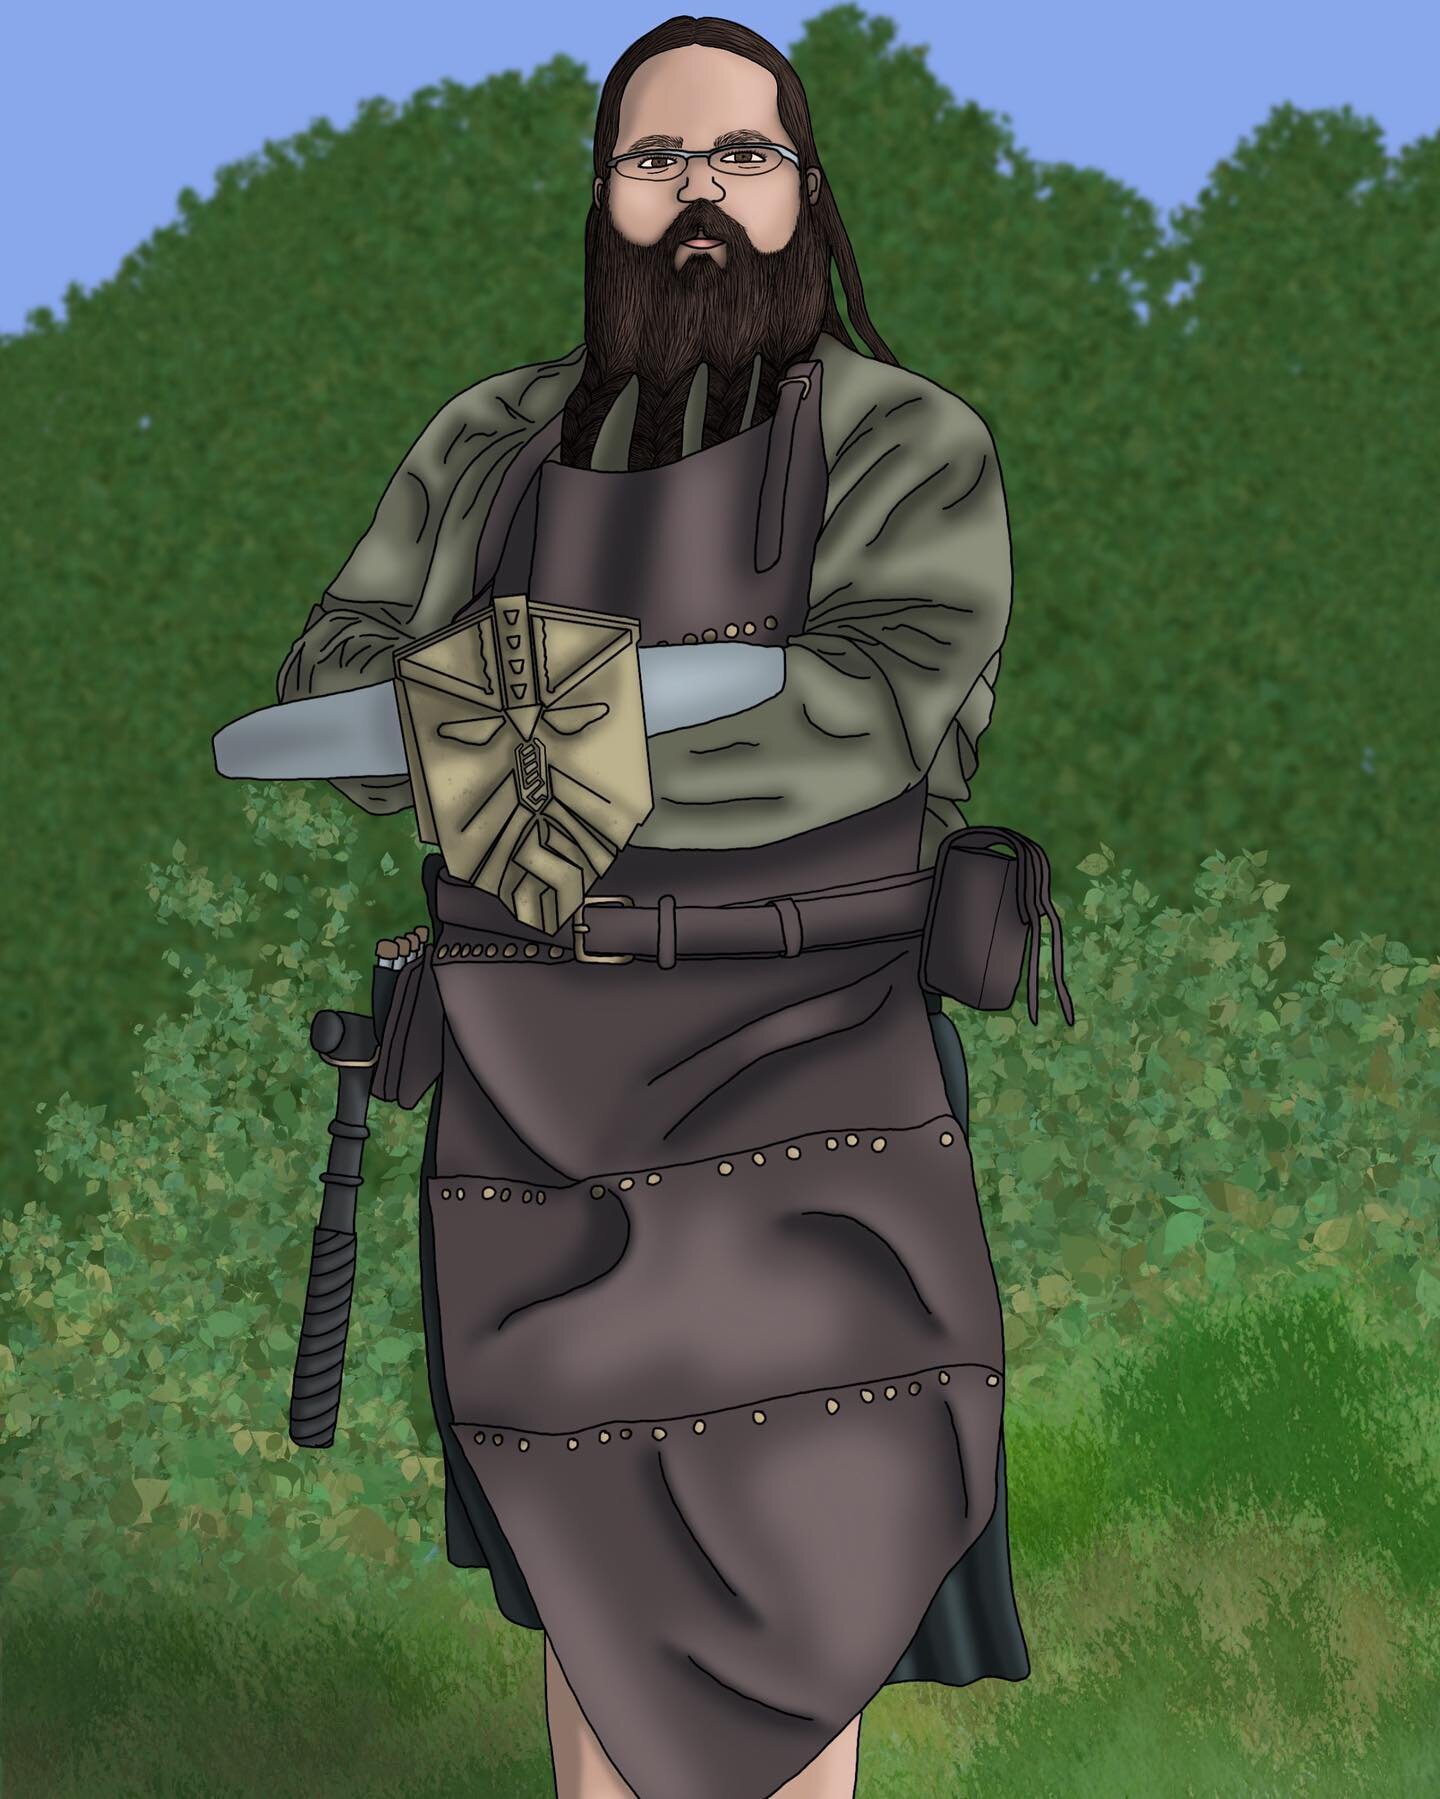 Player Spotlights: Entry 3!

Name: Killian Deepforge

Combat skills: I can repair armor very quickly. I have a crossbow too, but I prefer not to use it when possible.

Favorite food: Food on the surface is great, but I miss the cave fungus we used to